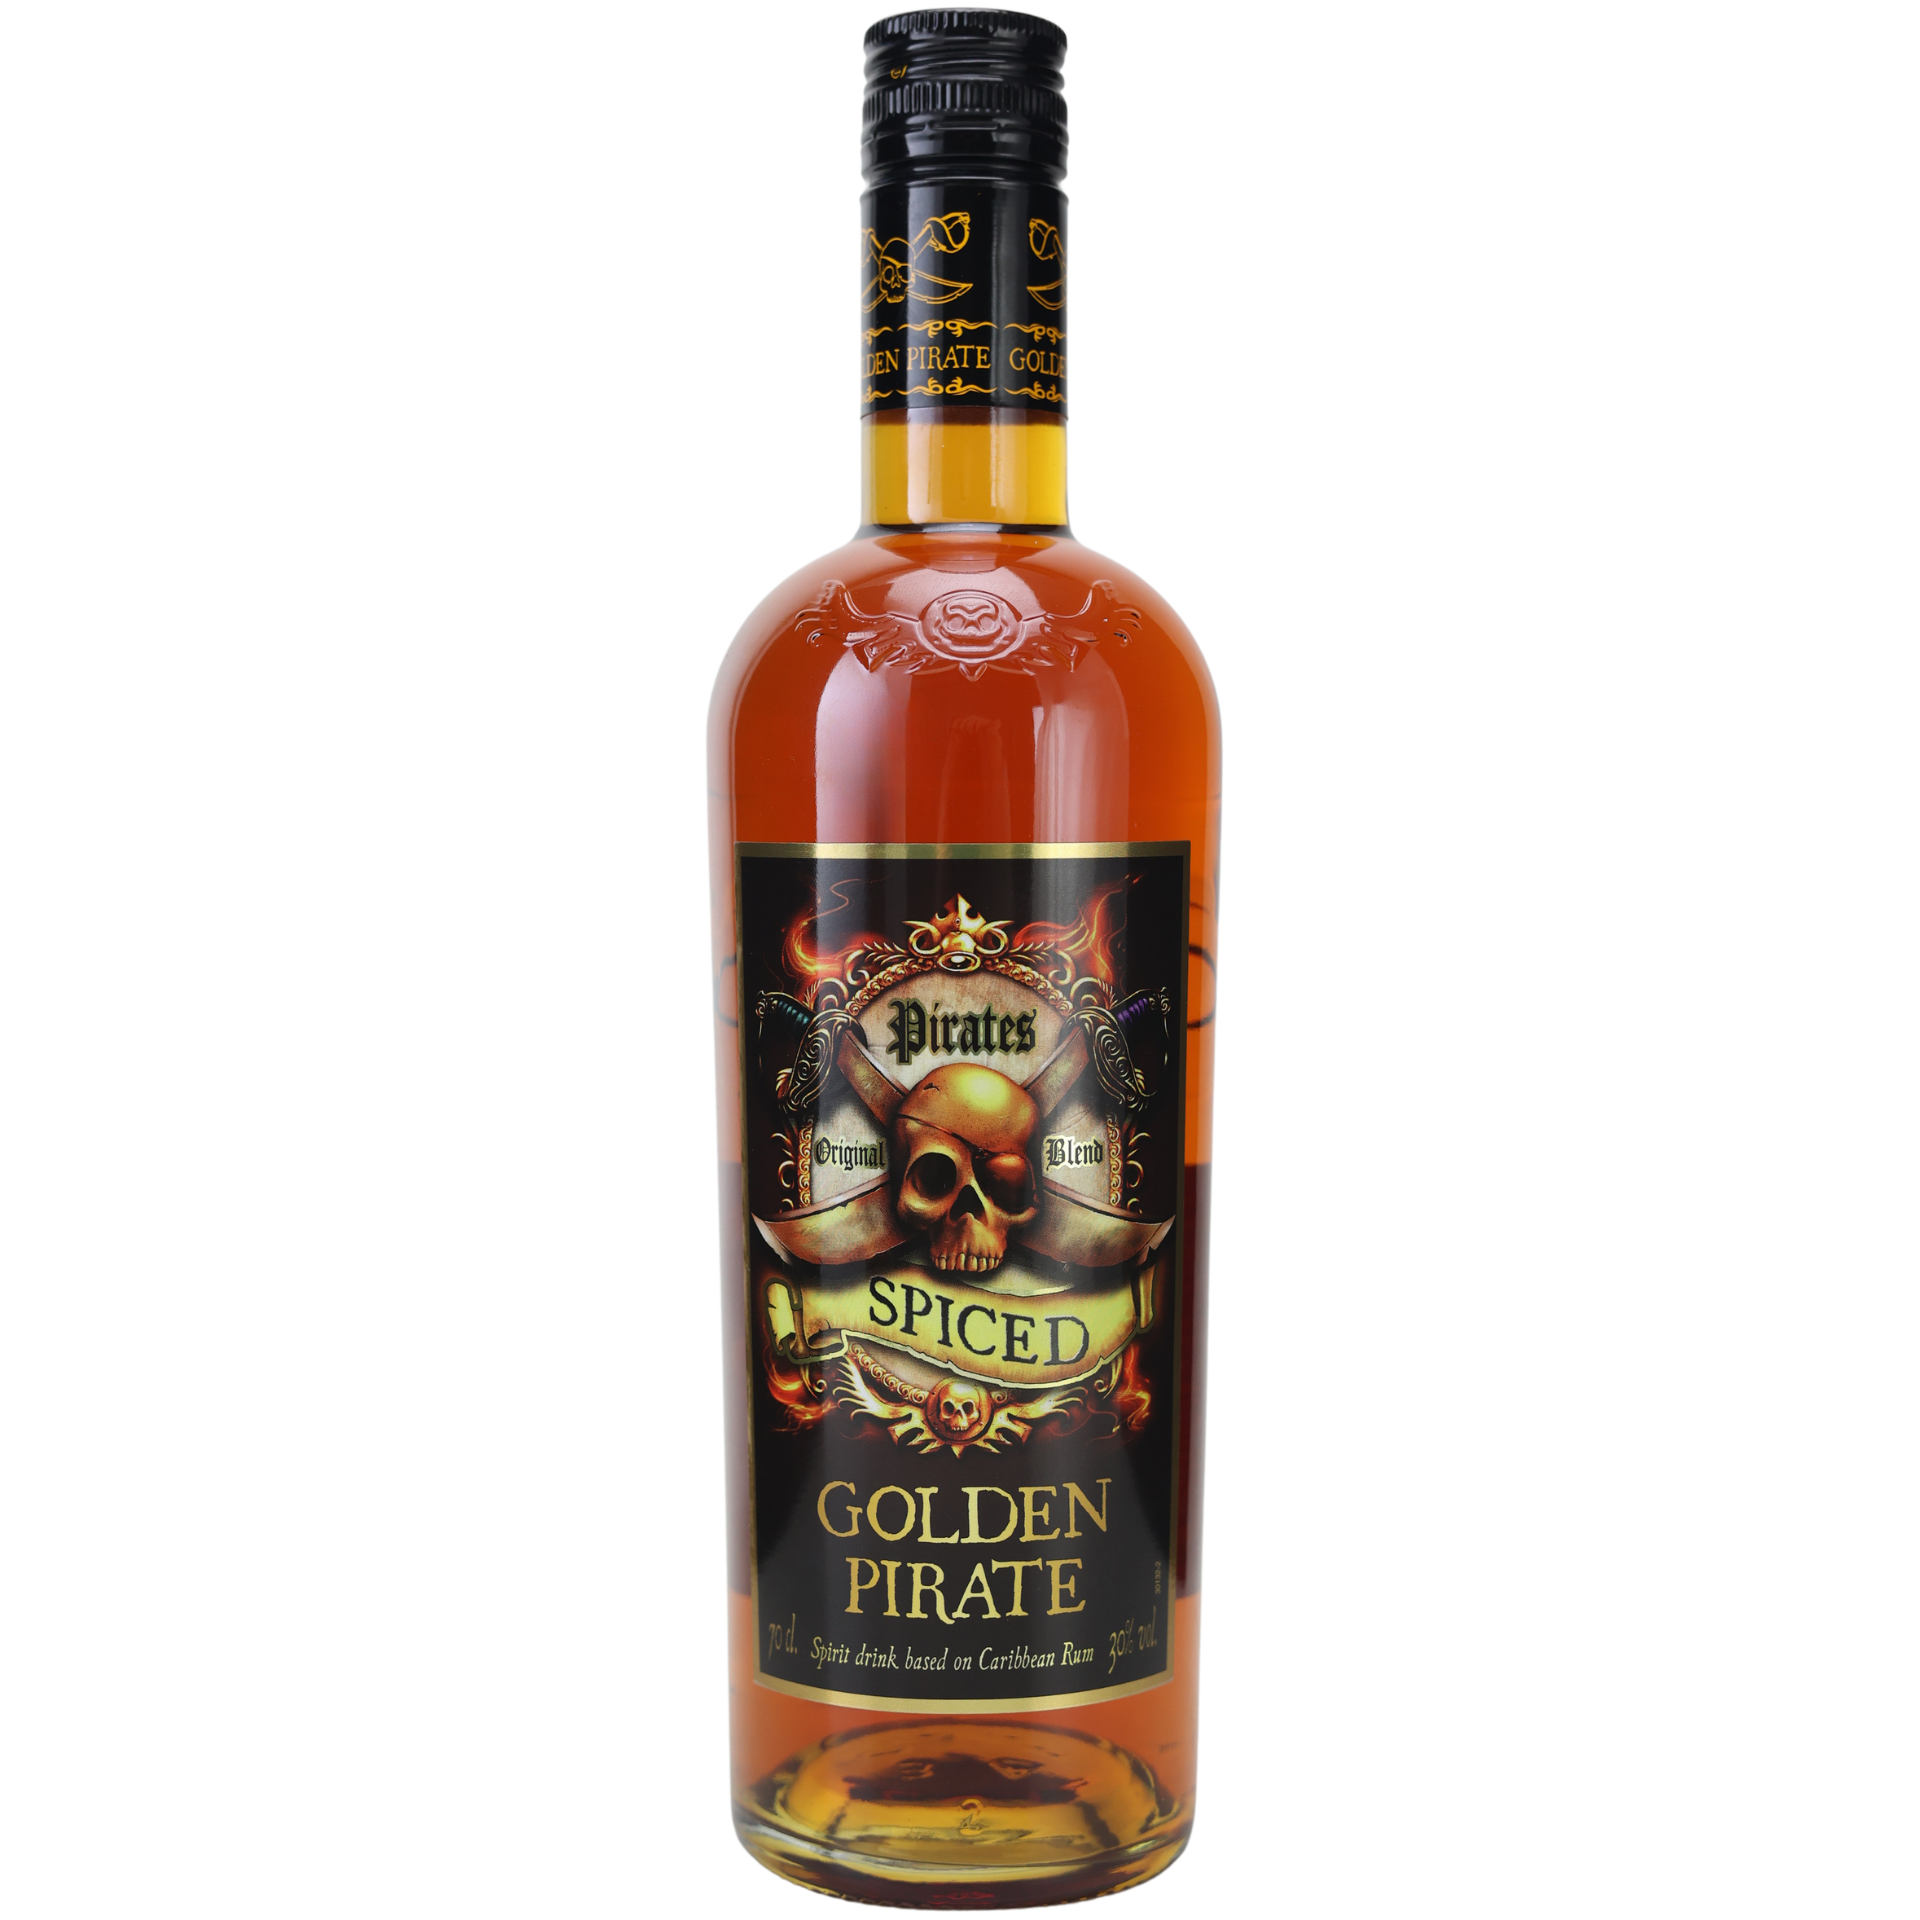 Golden Pirate Spiced (Rum Basis) 32% 0,7l